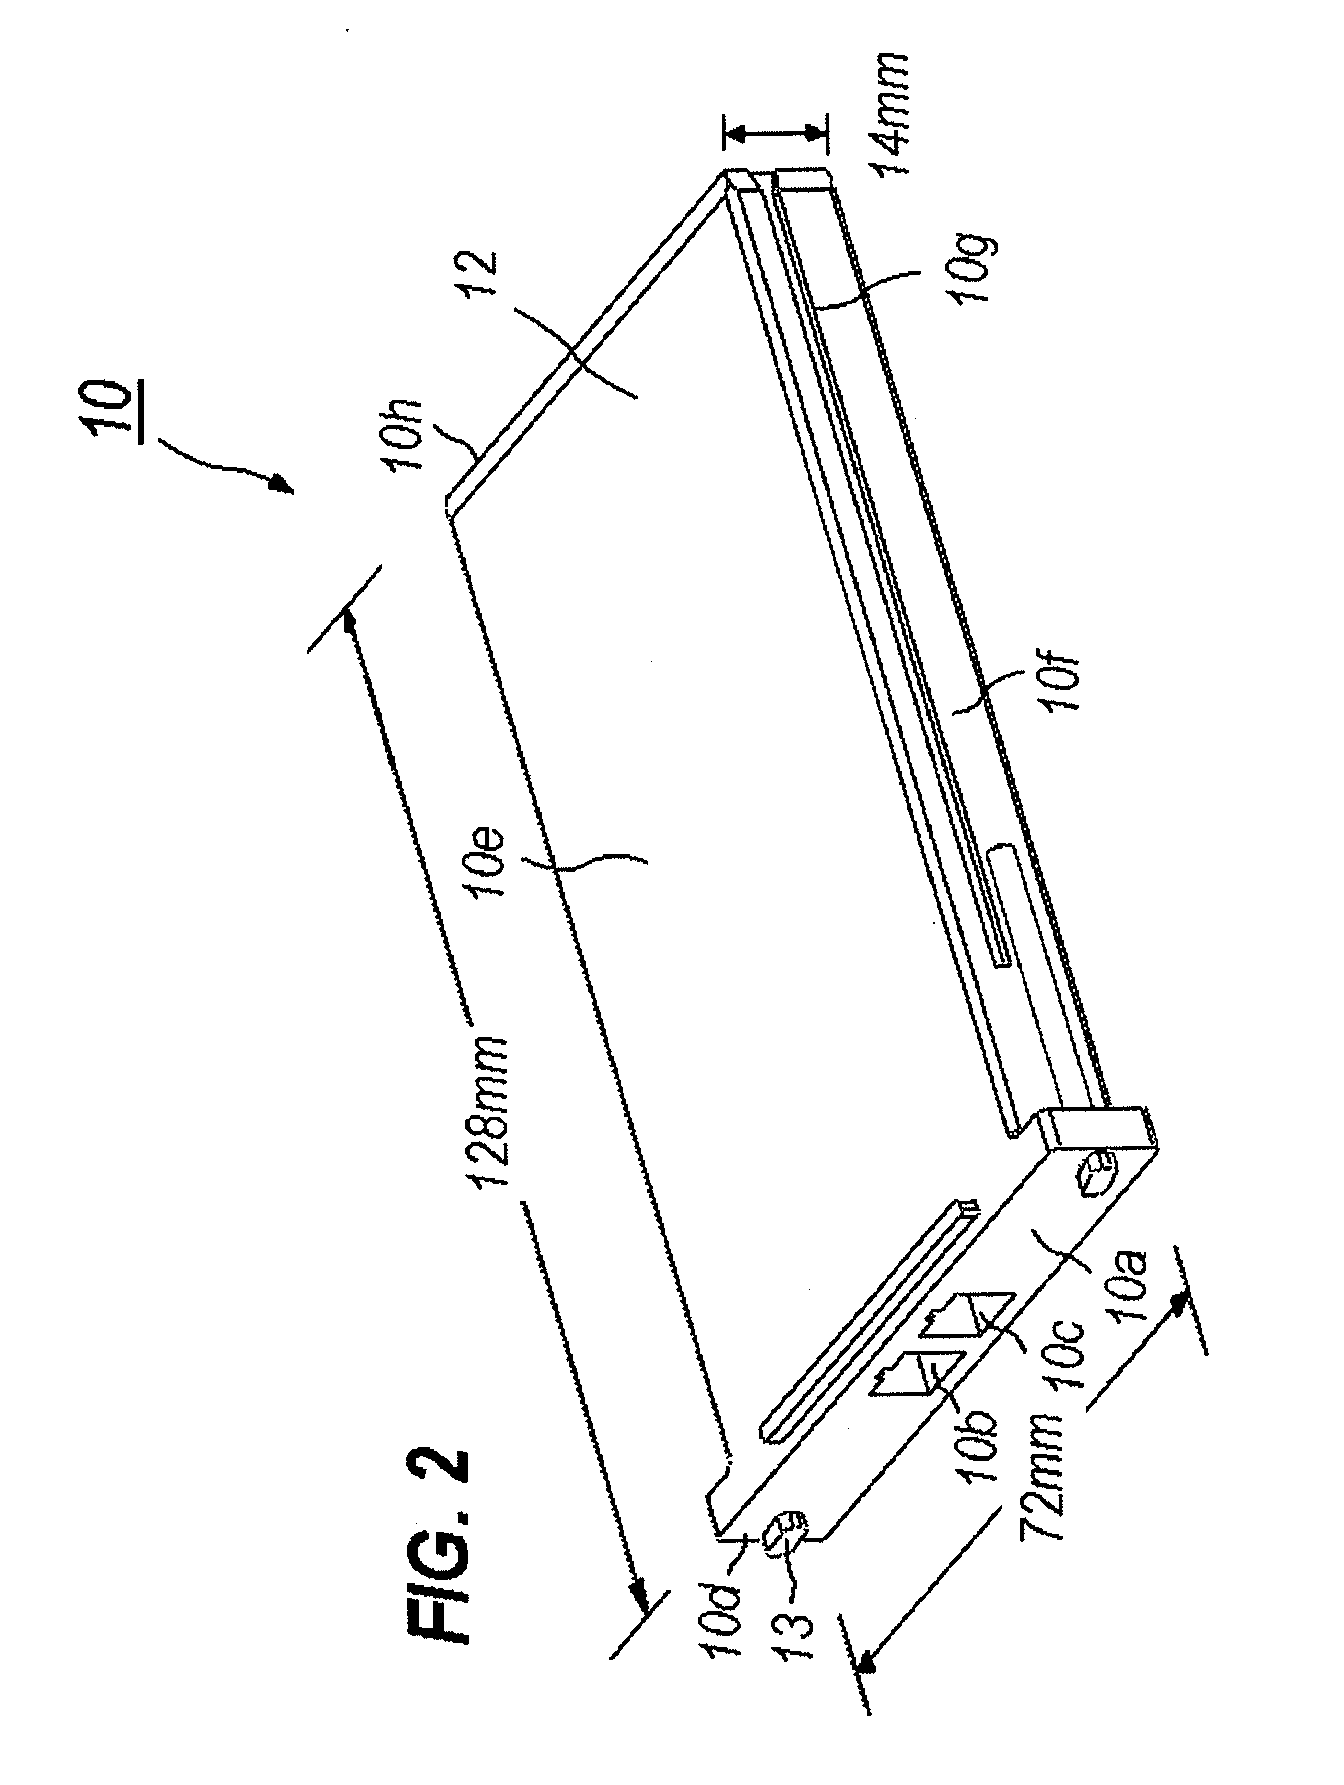 Pluggable system between optical transceiver and host system